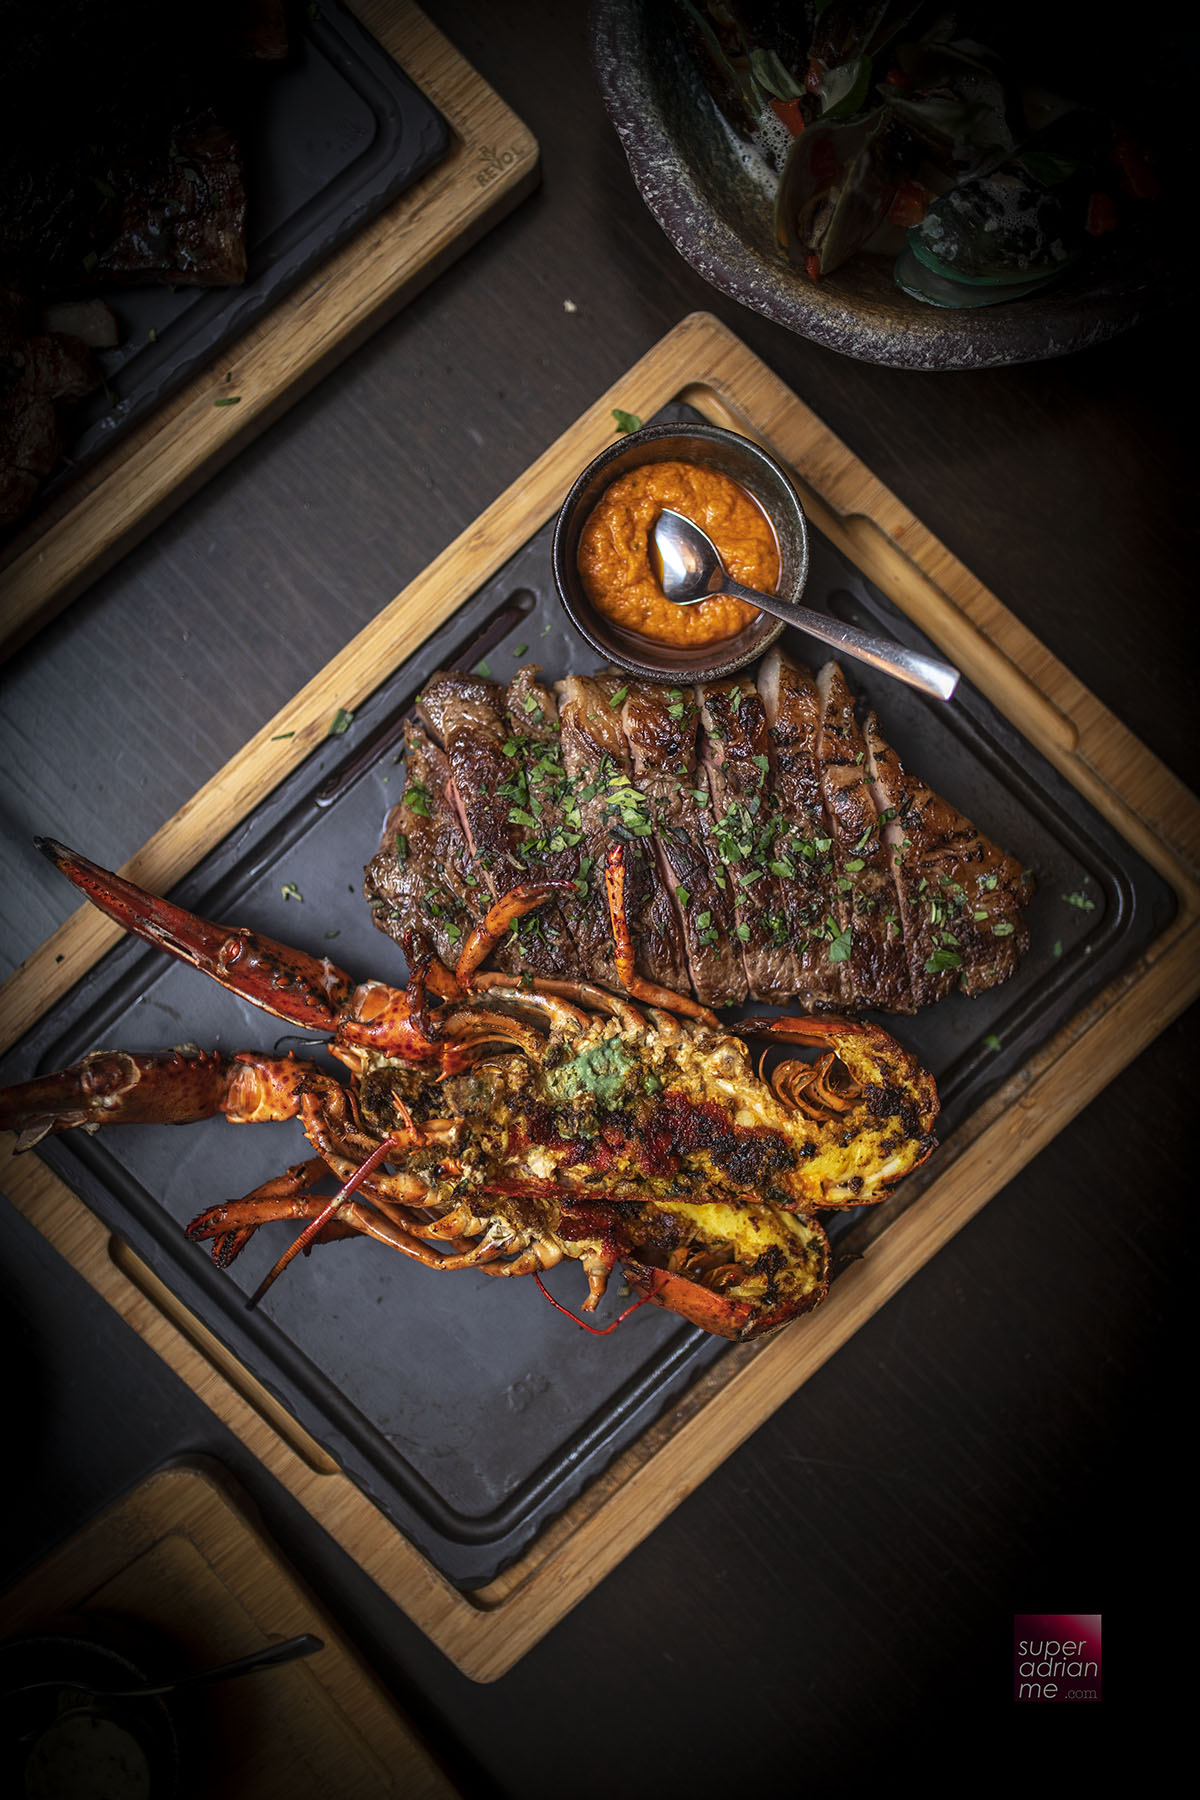 Opus Bar & Grill 500g Australian Westholme Wagyu Sirloin with 500g whole live MSC Boston Lobster for S8